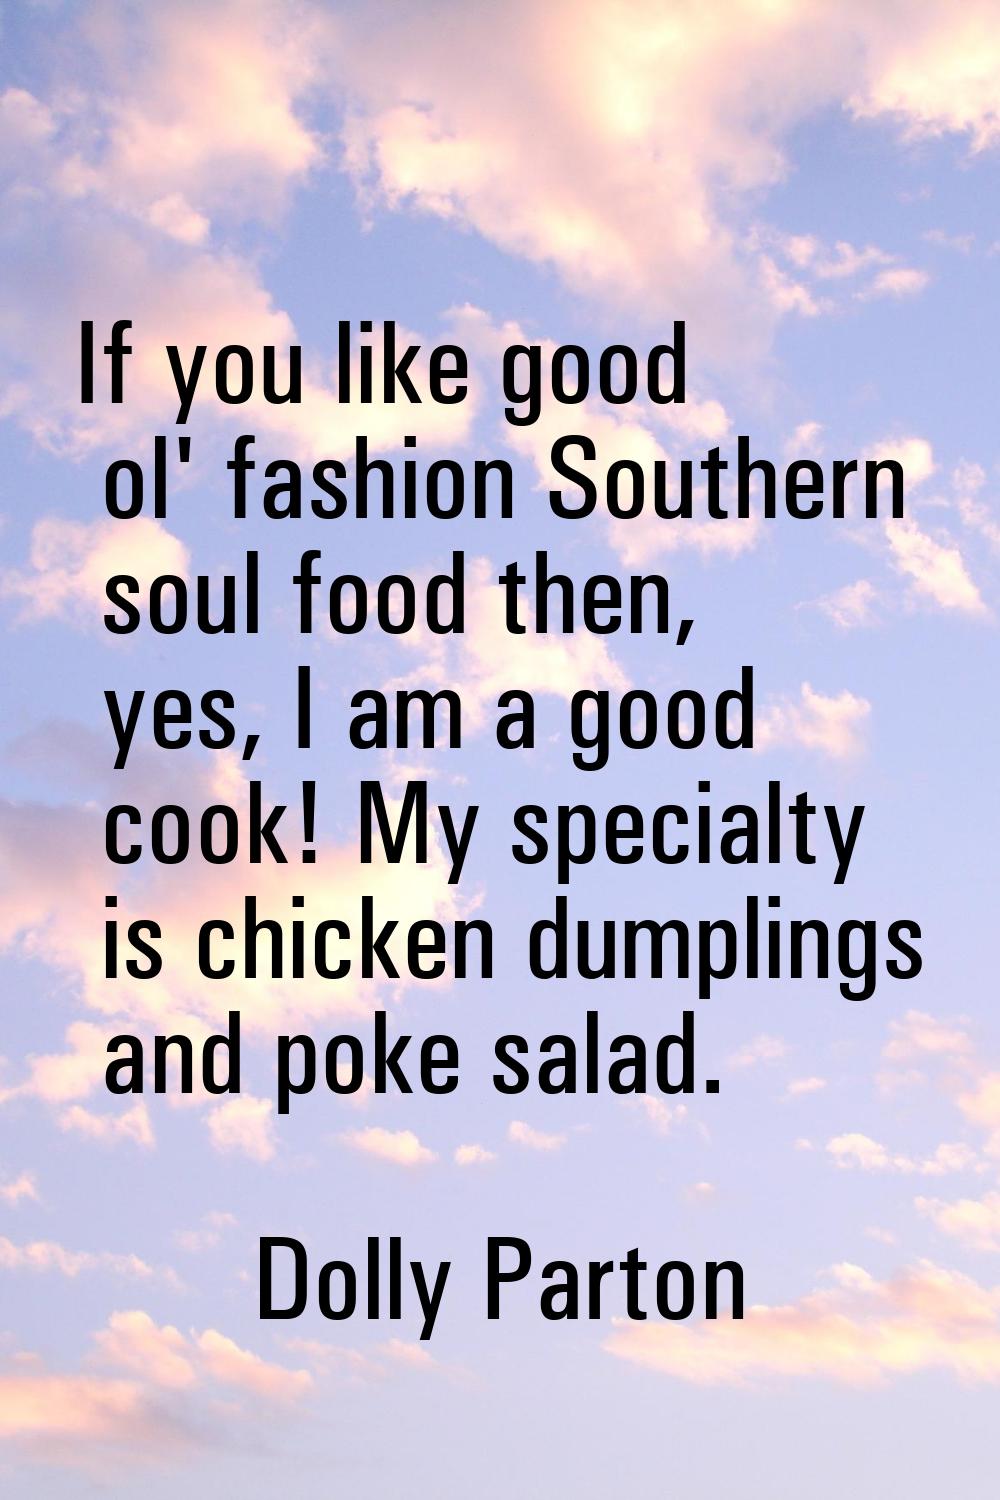 If you like good ol' fashion Southern soul food then, yes, I am a good cook! My specialty is chicke